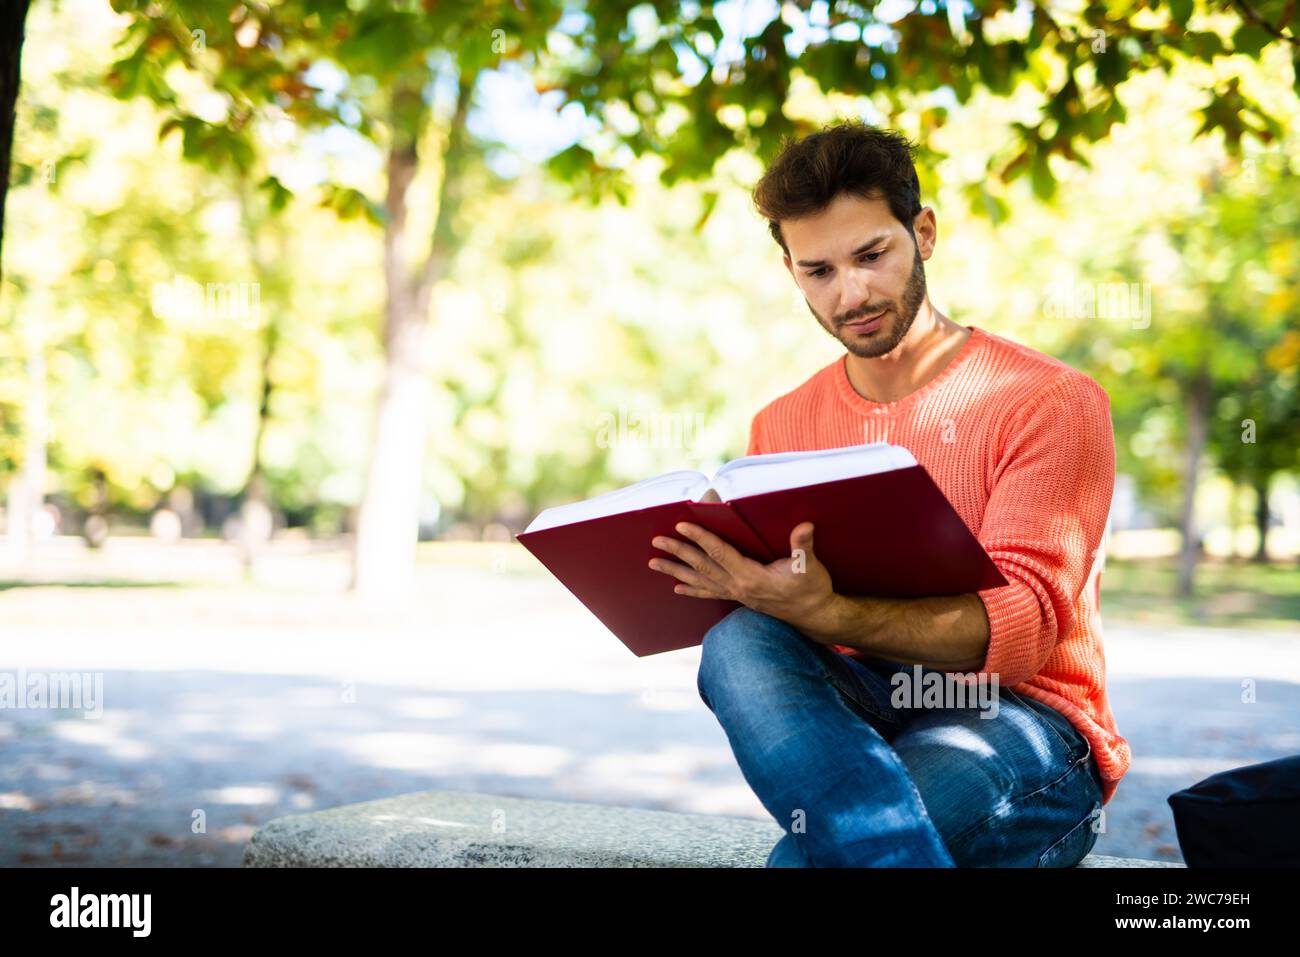 Handsome young man reading book on bench in the park Stock Photo